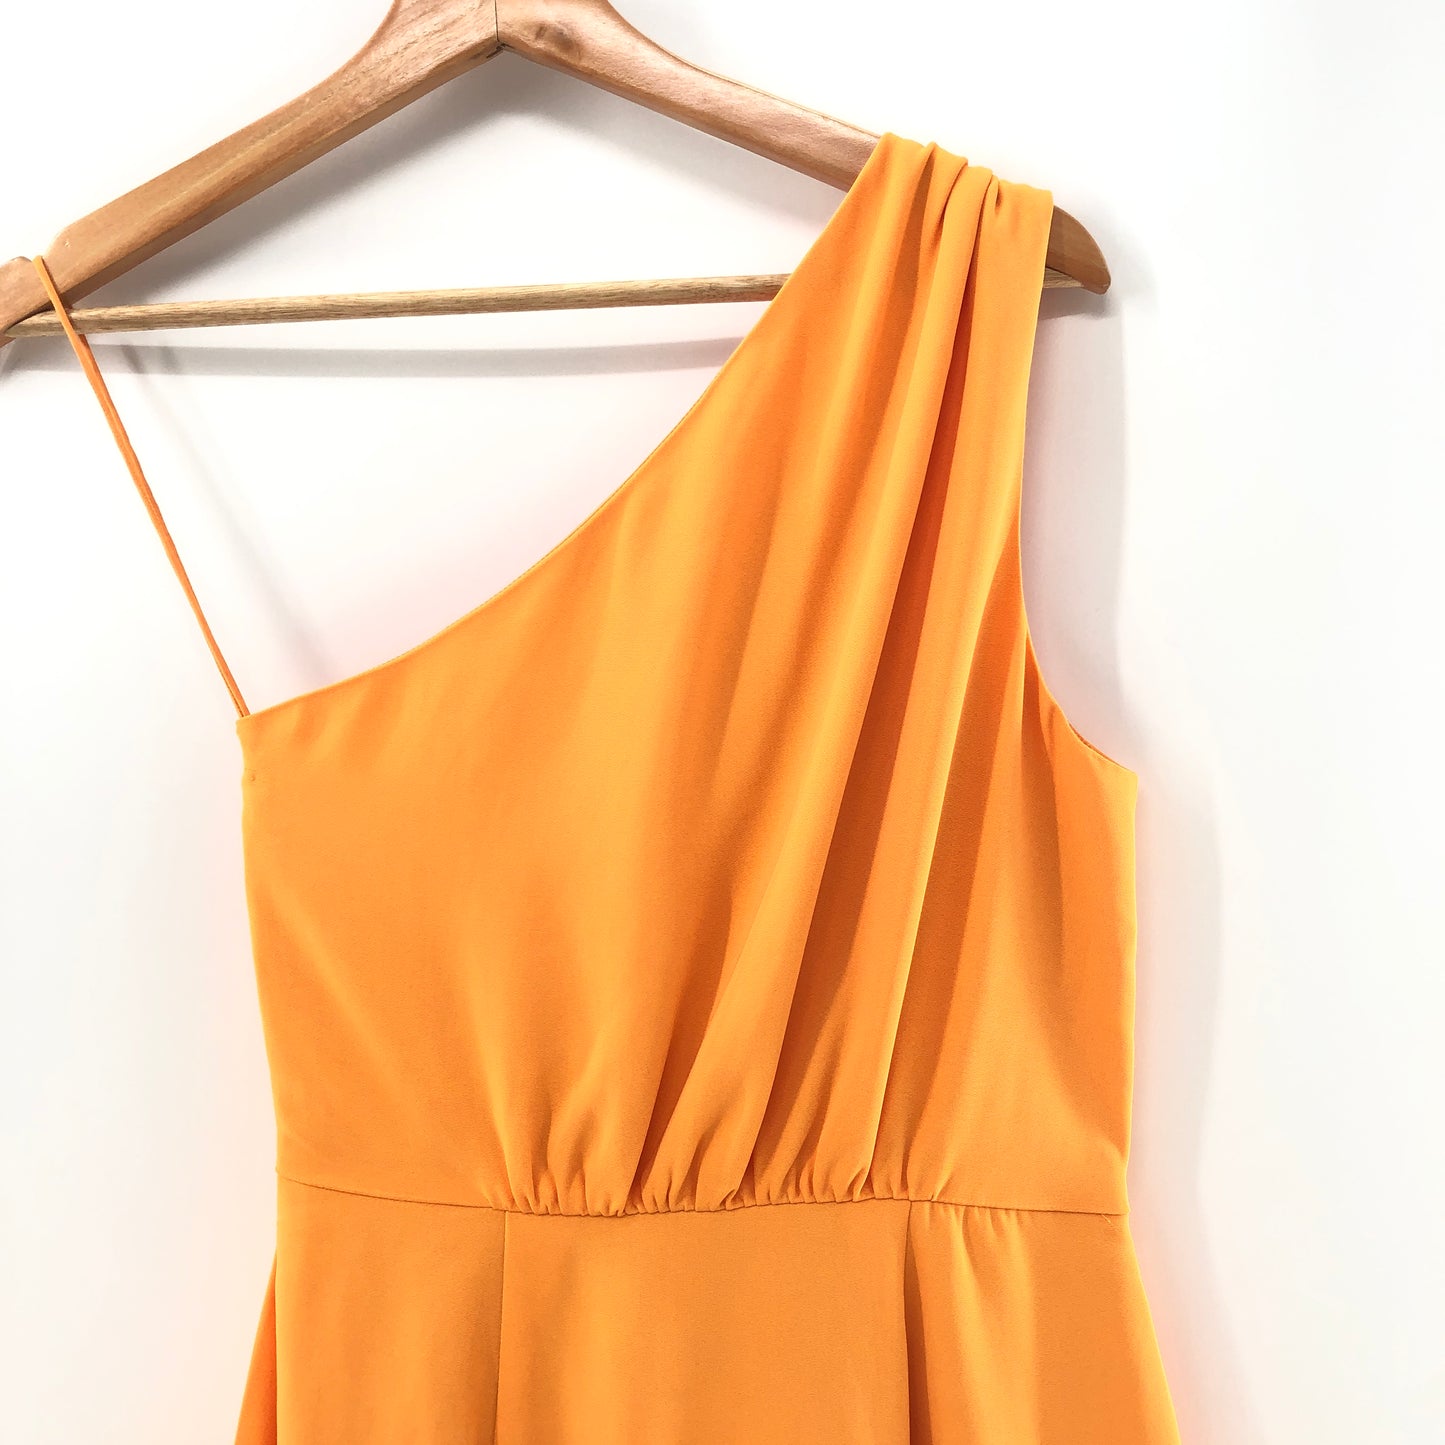 SAYLOR Audrie Dress in Marigold